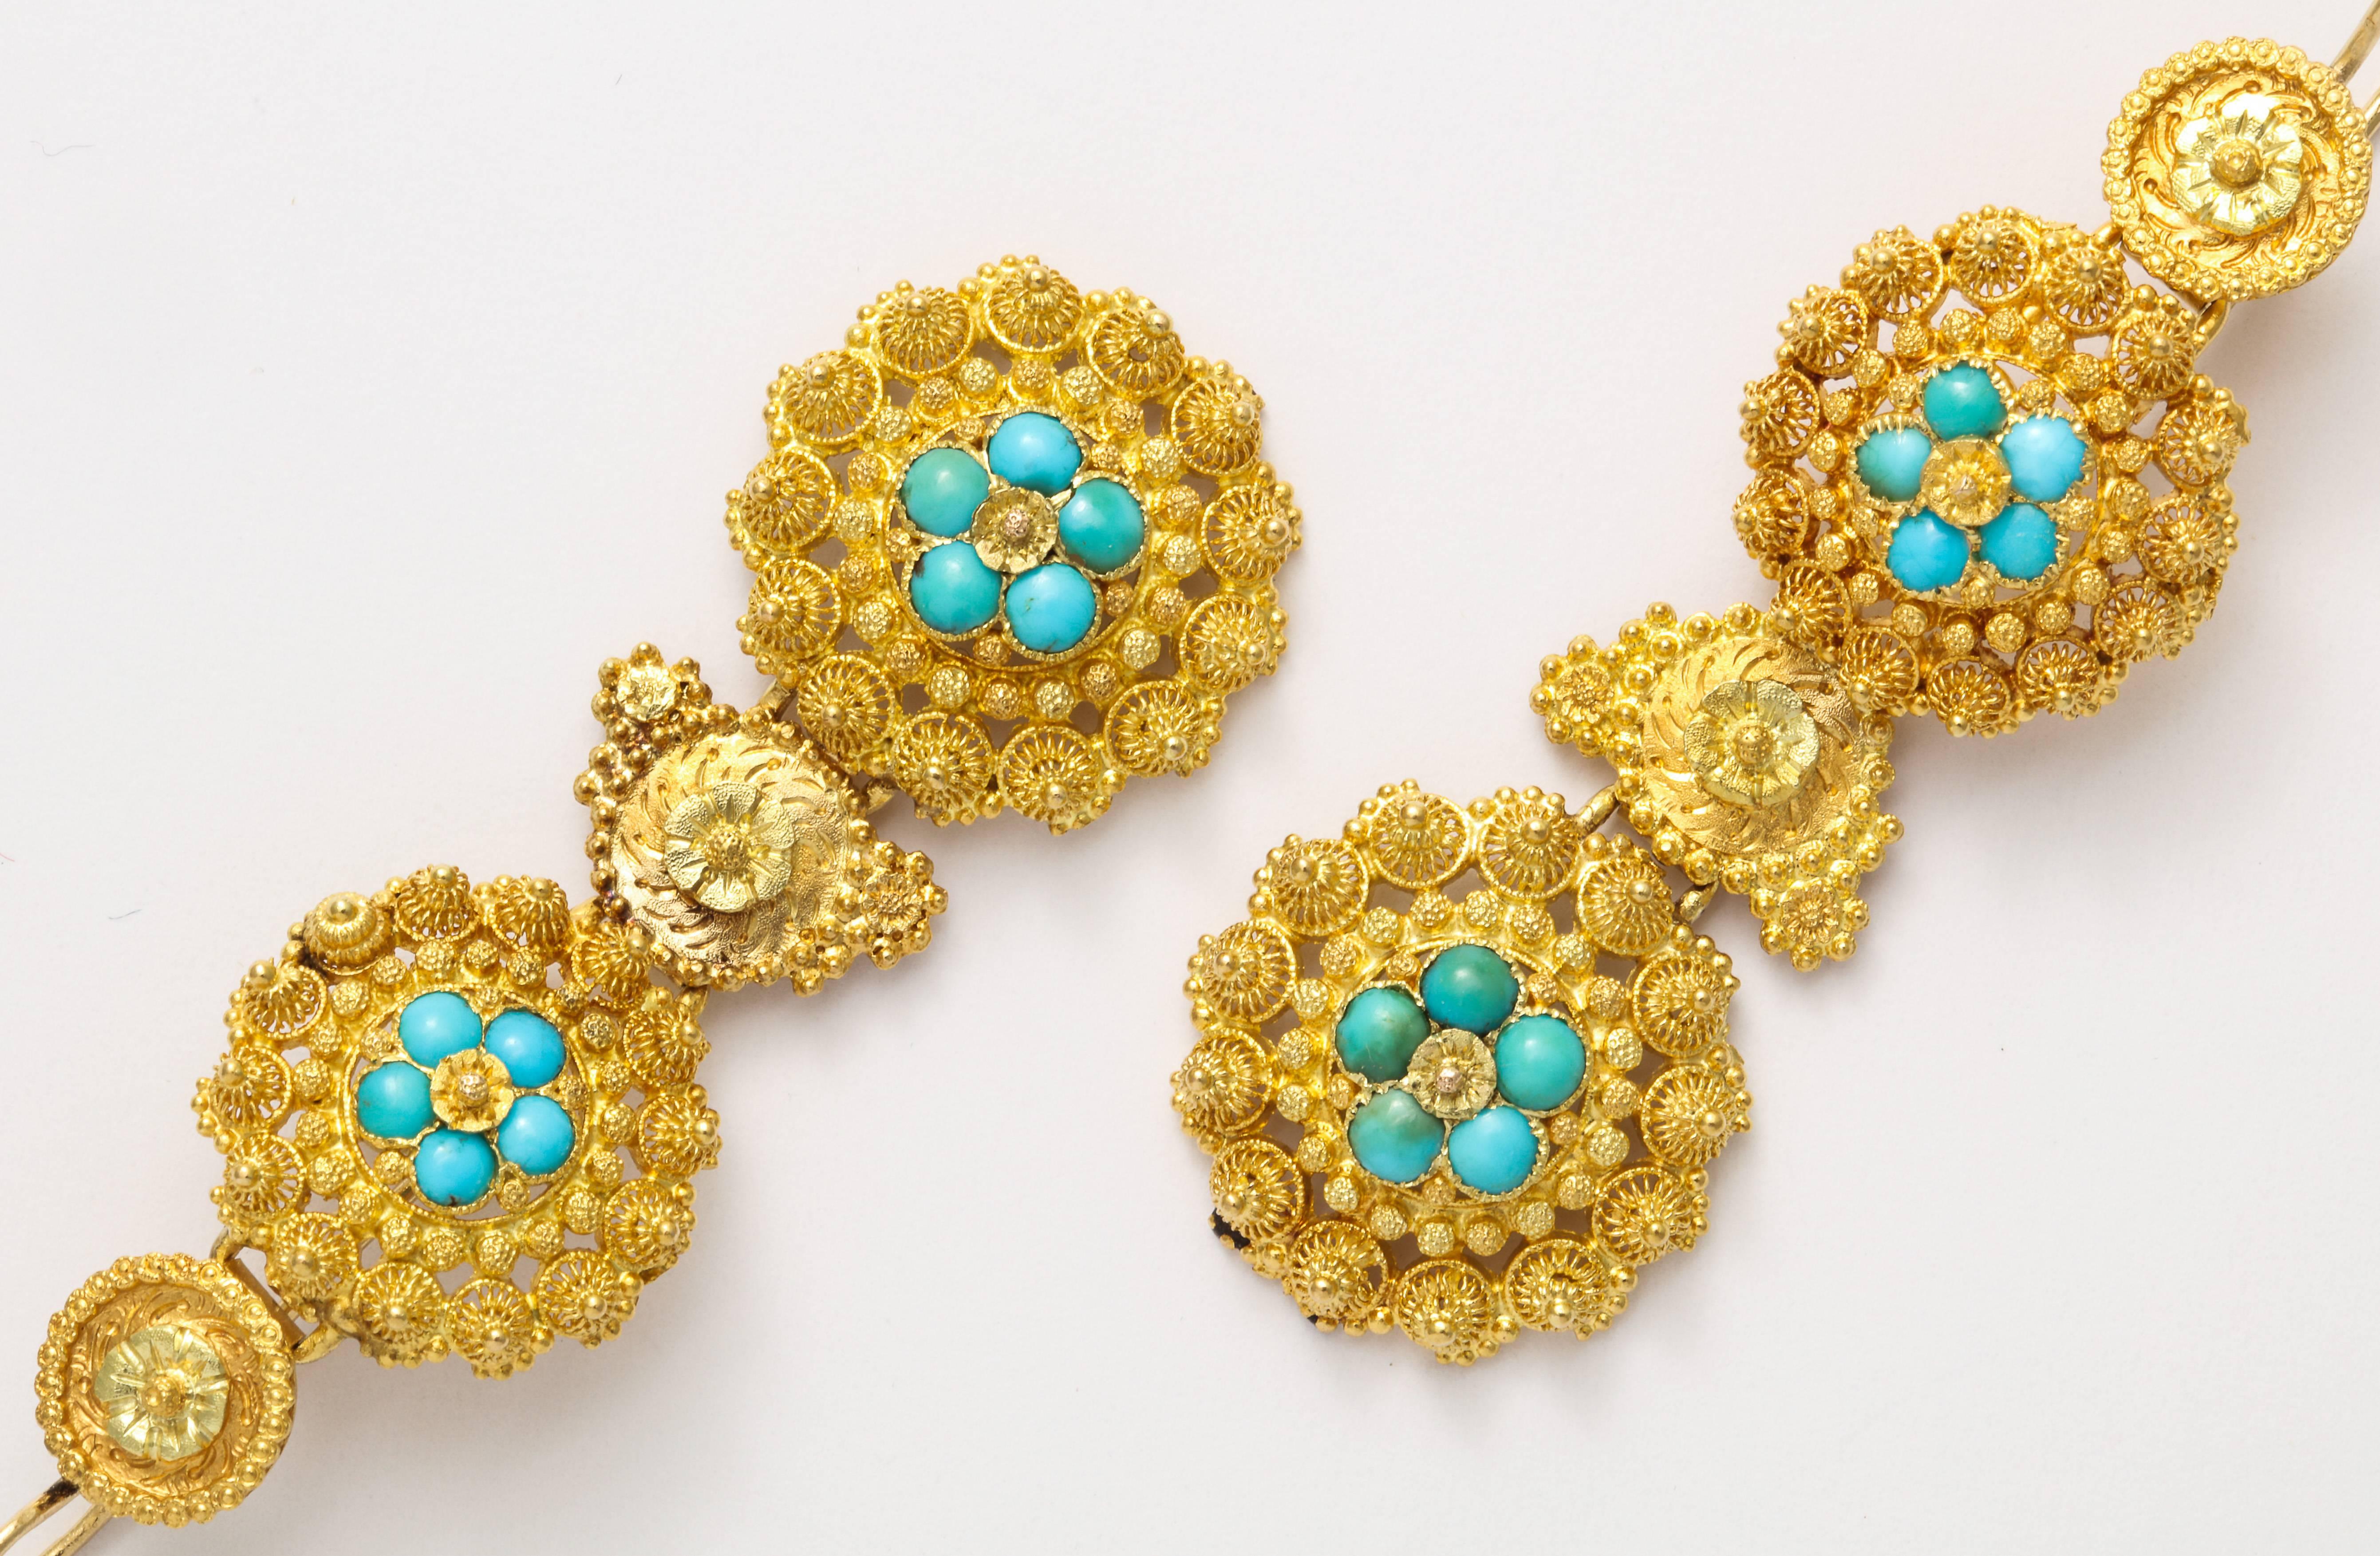 antique gold and turquoise earrings